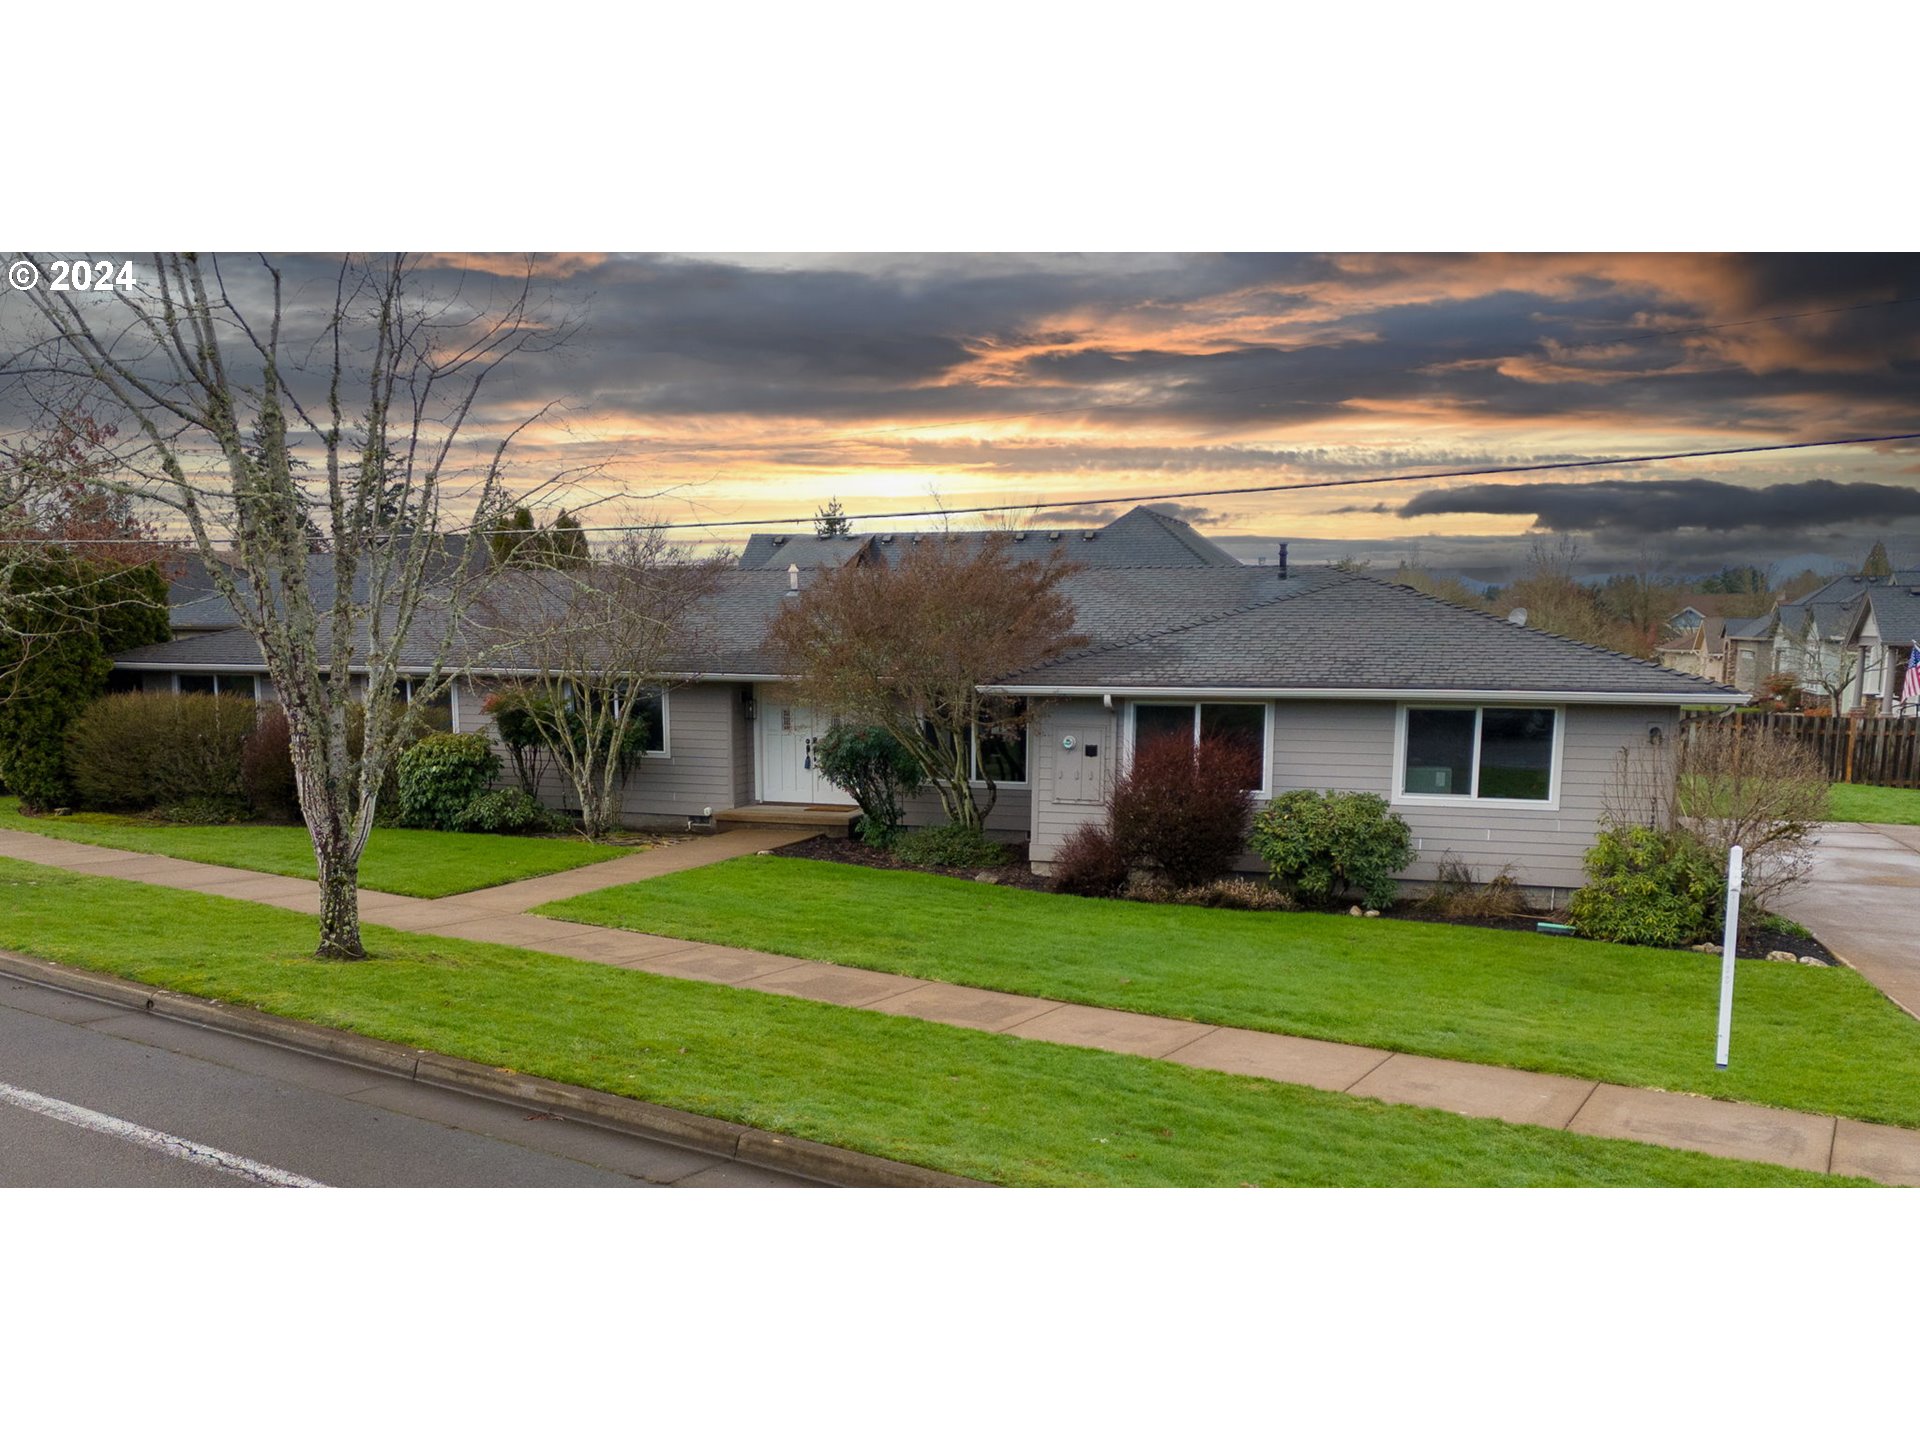 2150 SW 45TH ST, Corvallis, OR 